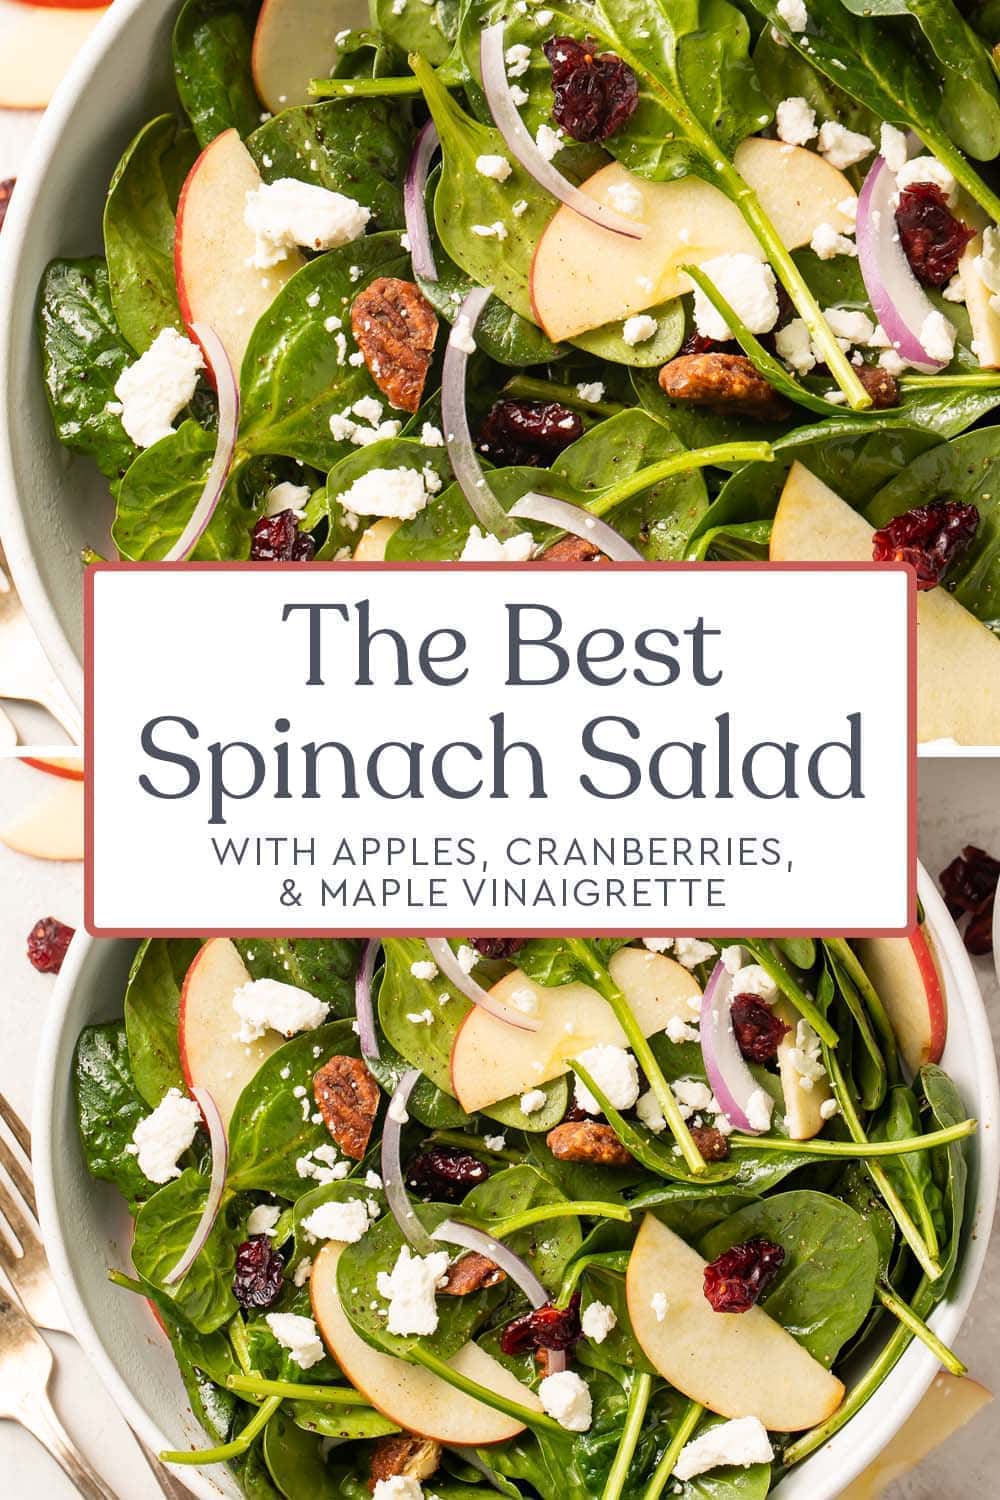 The Best Spinach Salad (with Maple Vinaigrette) - 40 Aprons